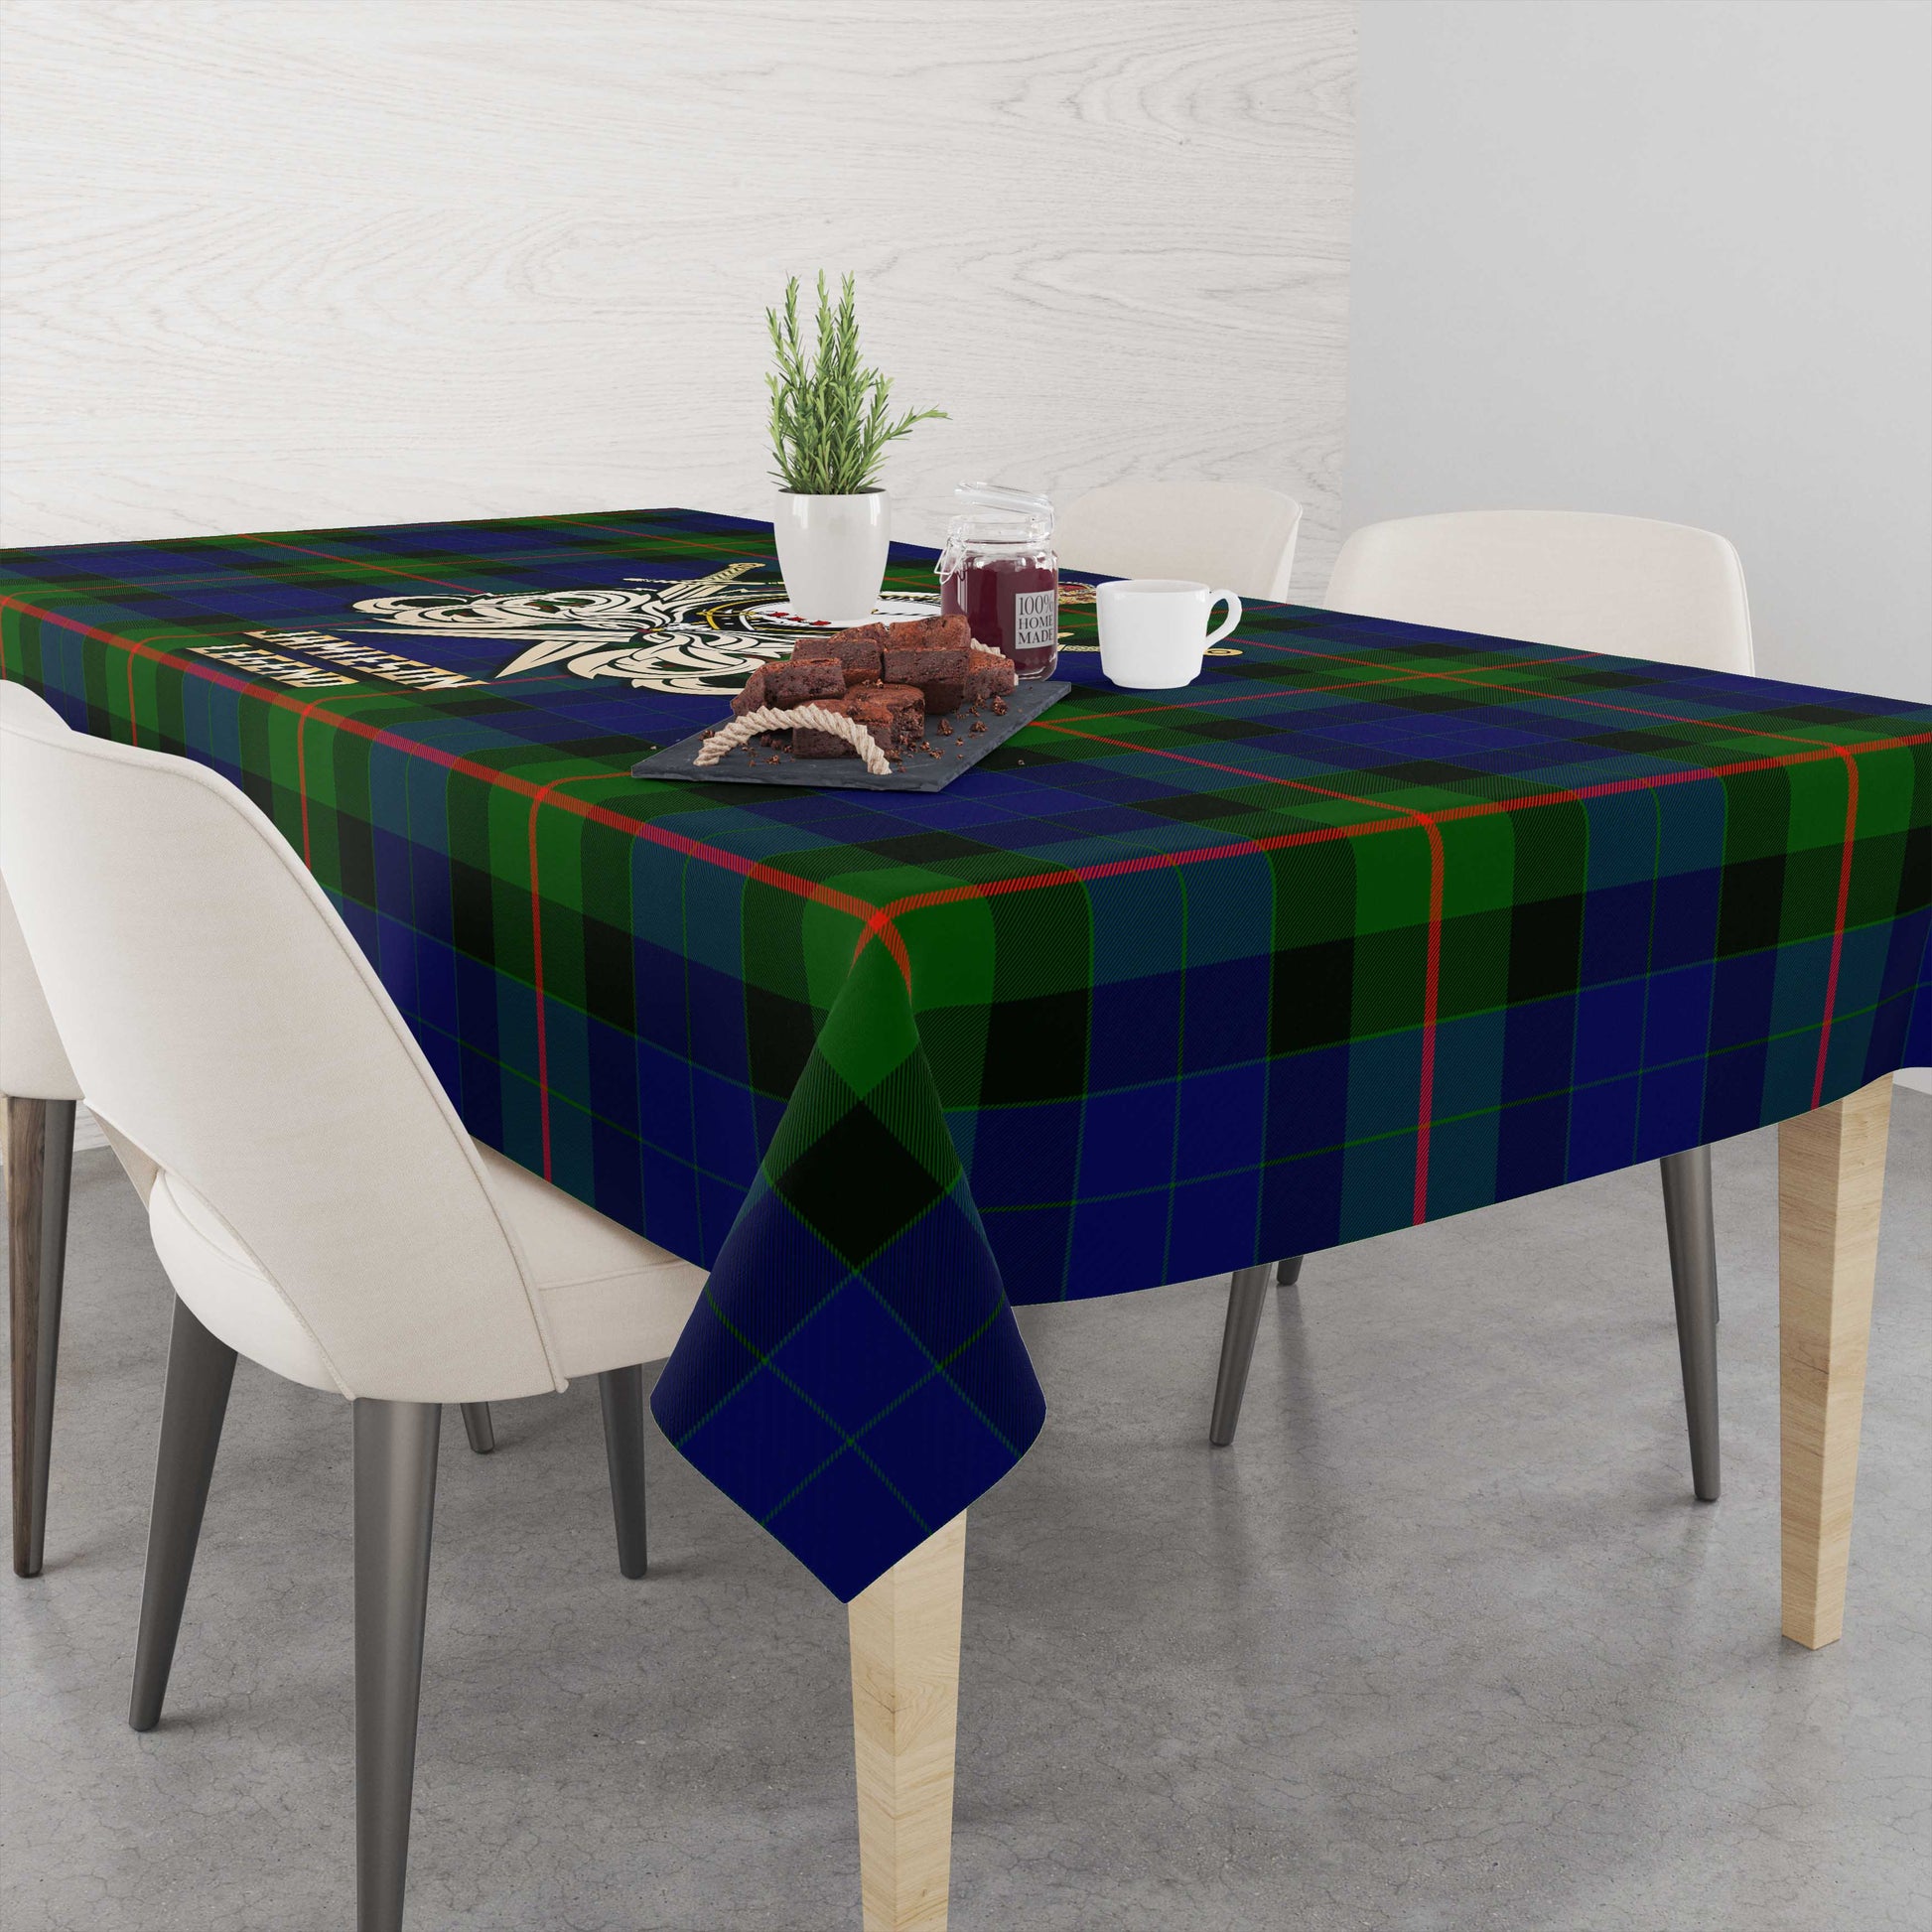 Tartan Vibes Clothing Jamieson Tartan Tablecloth with Clan Crest and the Golden Sword of Courageous Legacy